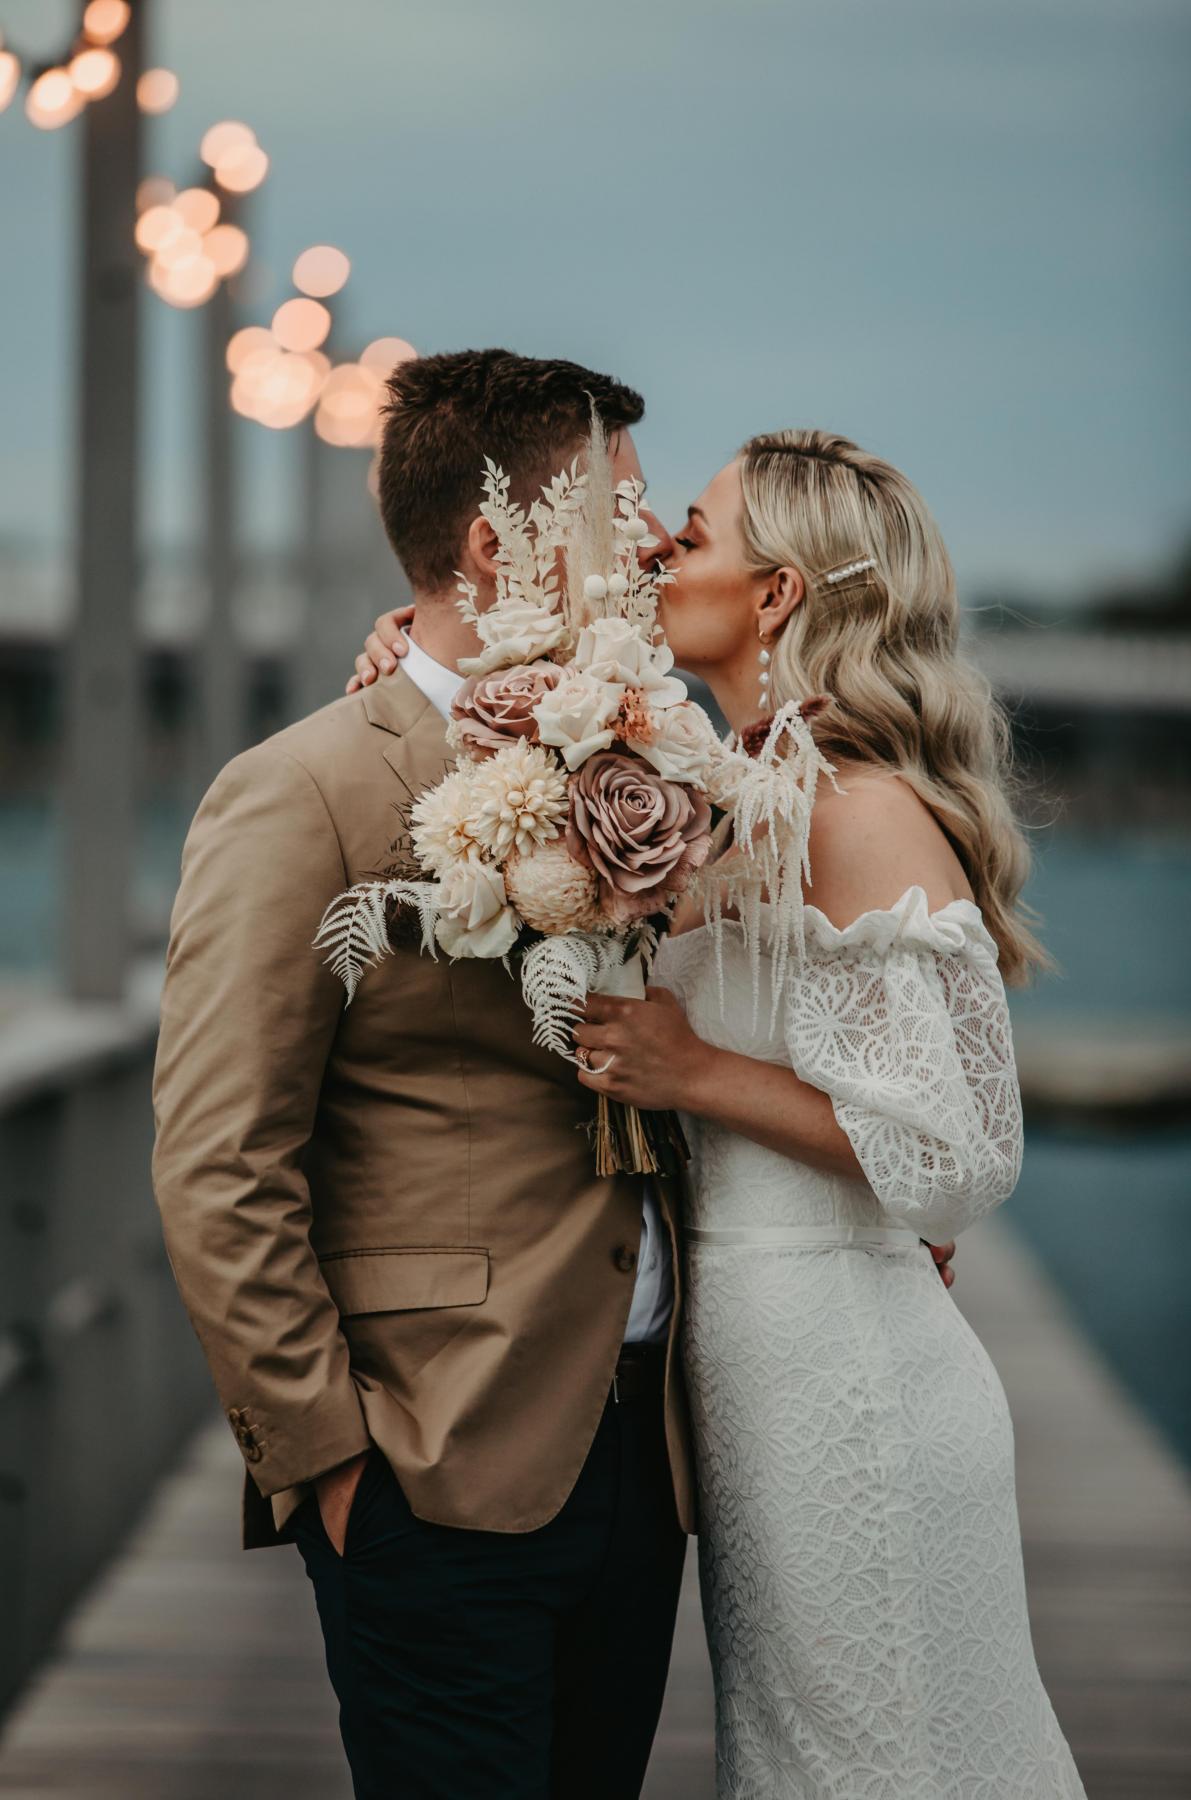 Real bride Kacie-Lee wears the Vivienne gown; a puff sleeve lace wedding dress by Karen Willis Holmes to beach wedding with natural toned bridal blooms.